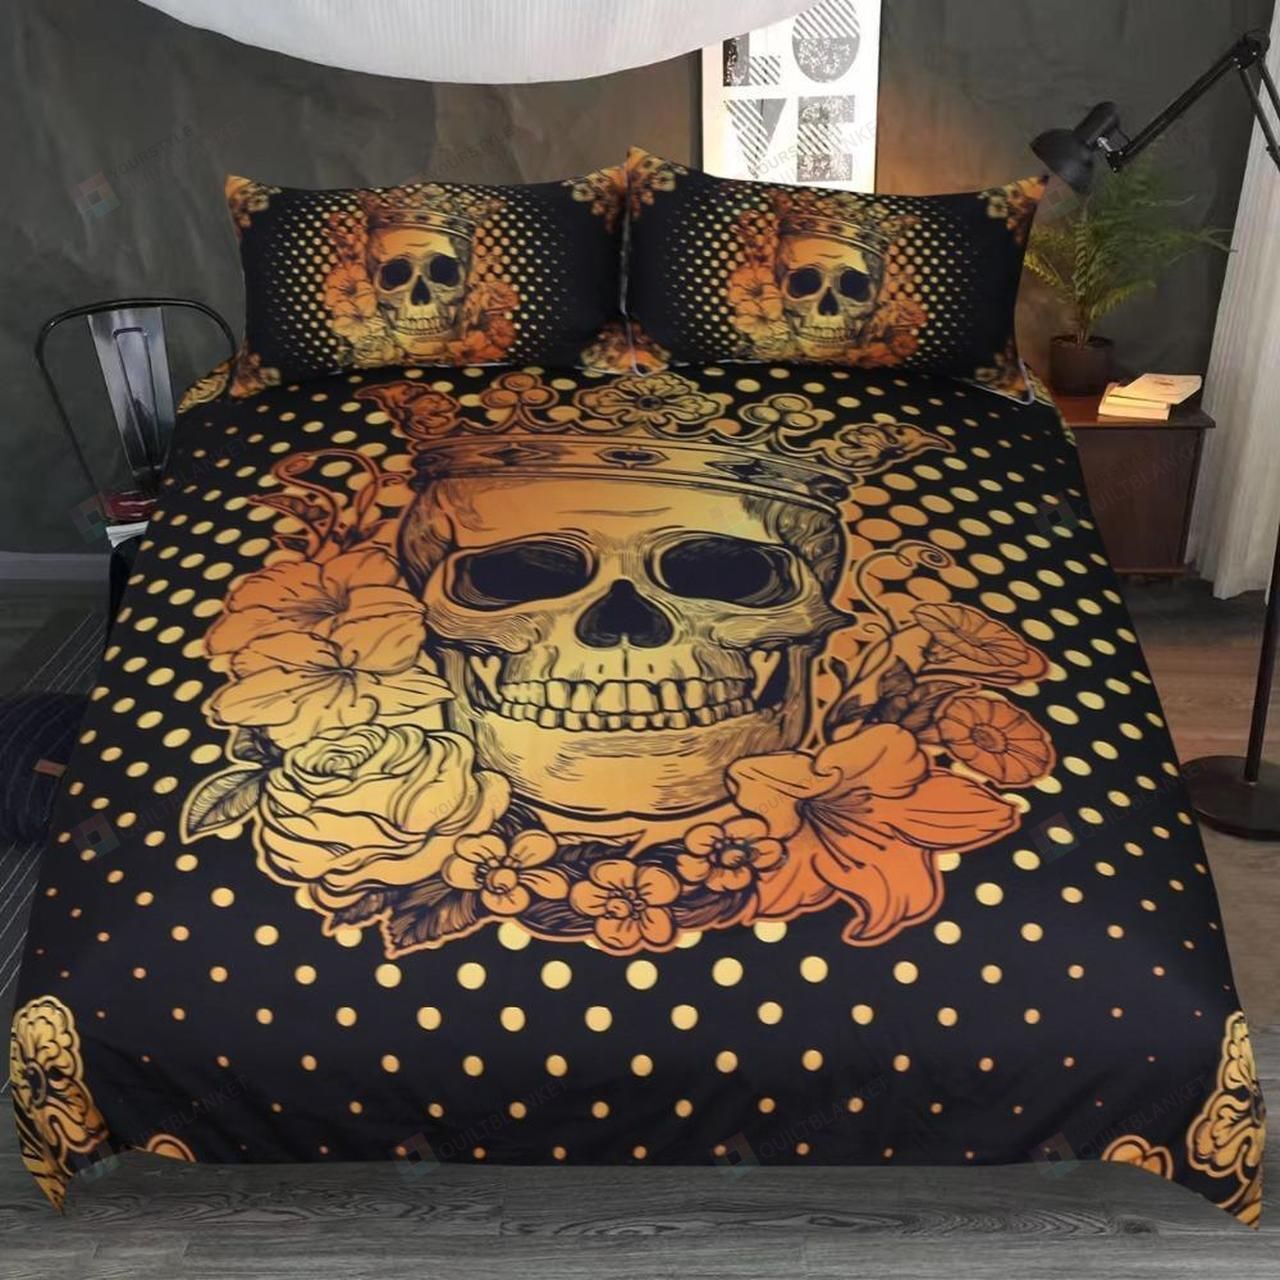 Crowned Skull Dotted Background Bedding Set (Duvet Cover & Pillow Cases)